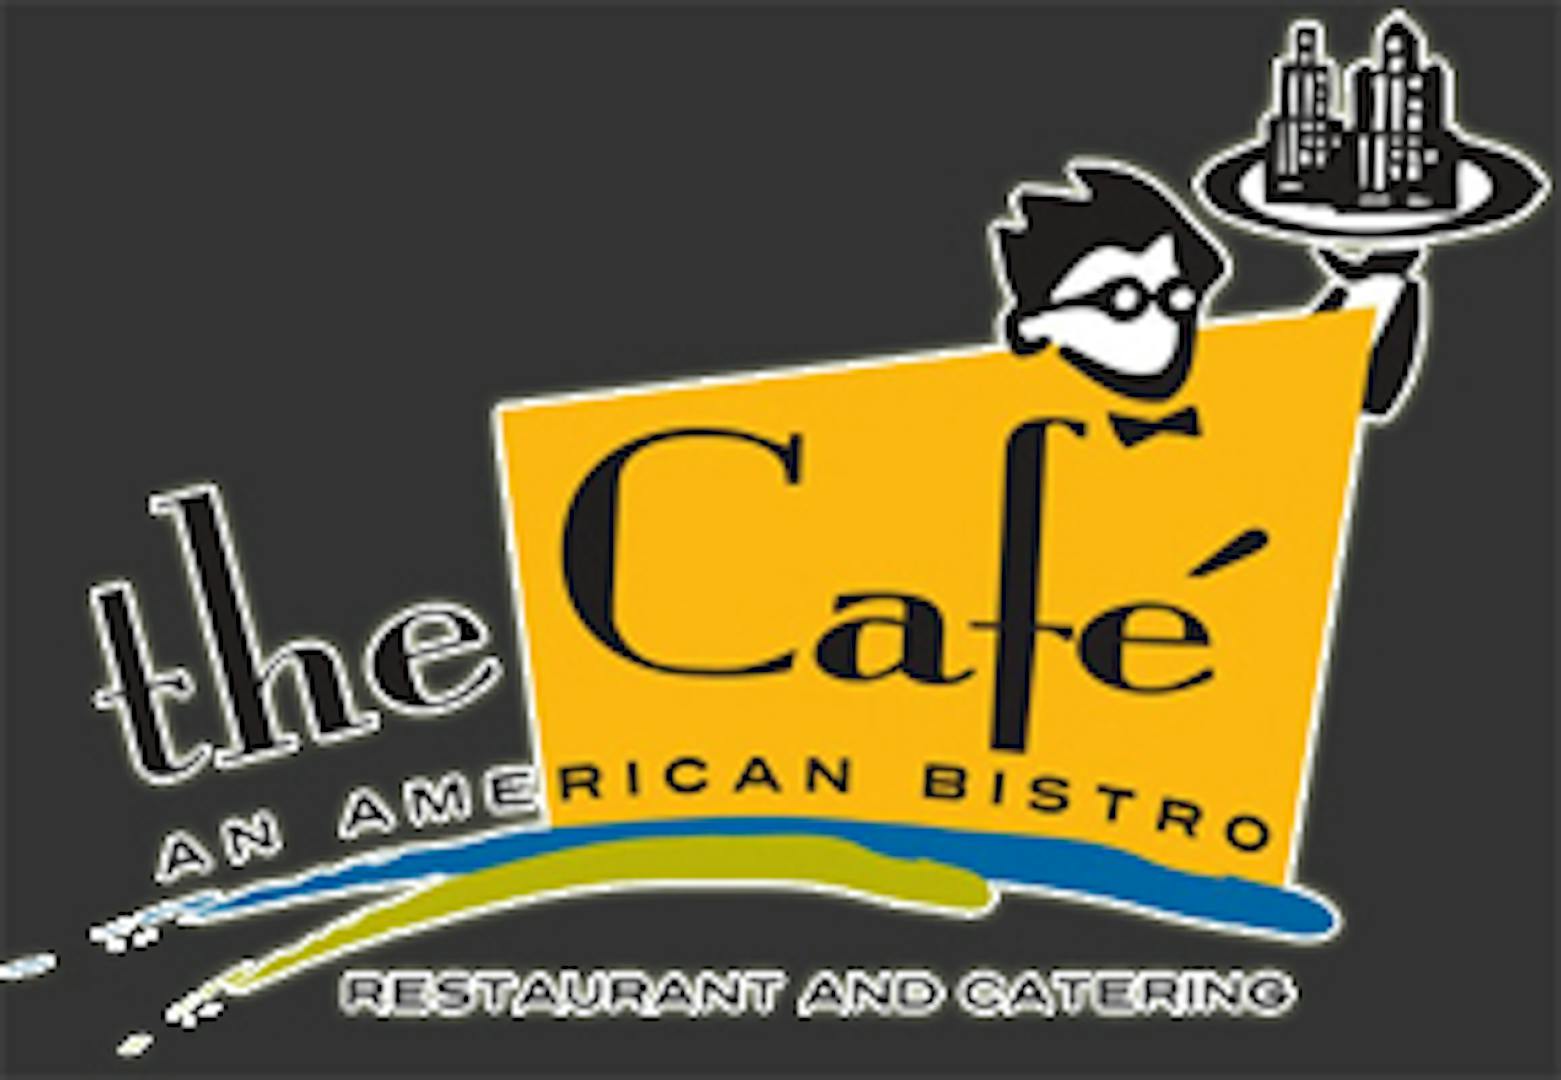 THE CAFE AMERICAN BISTRO